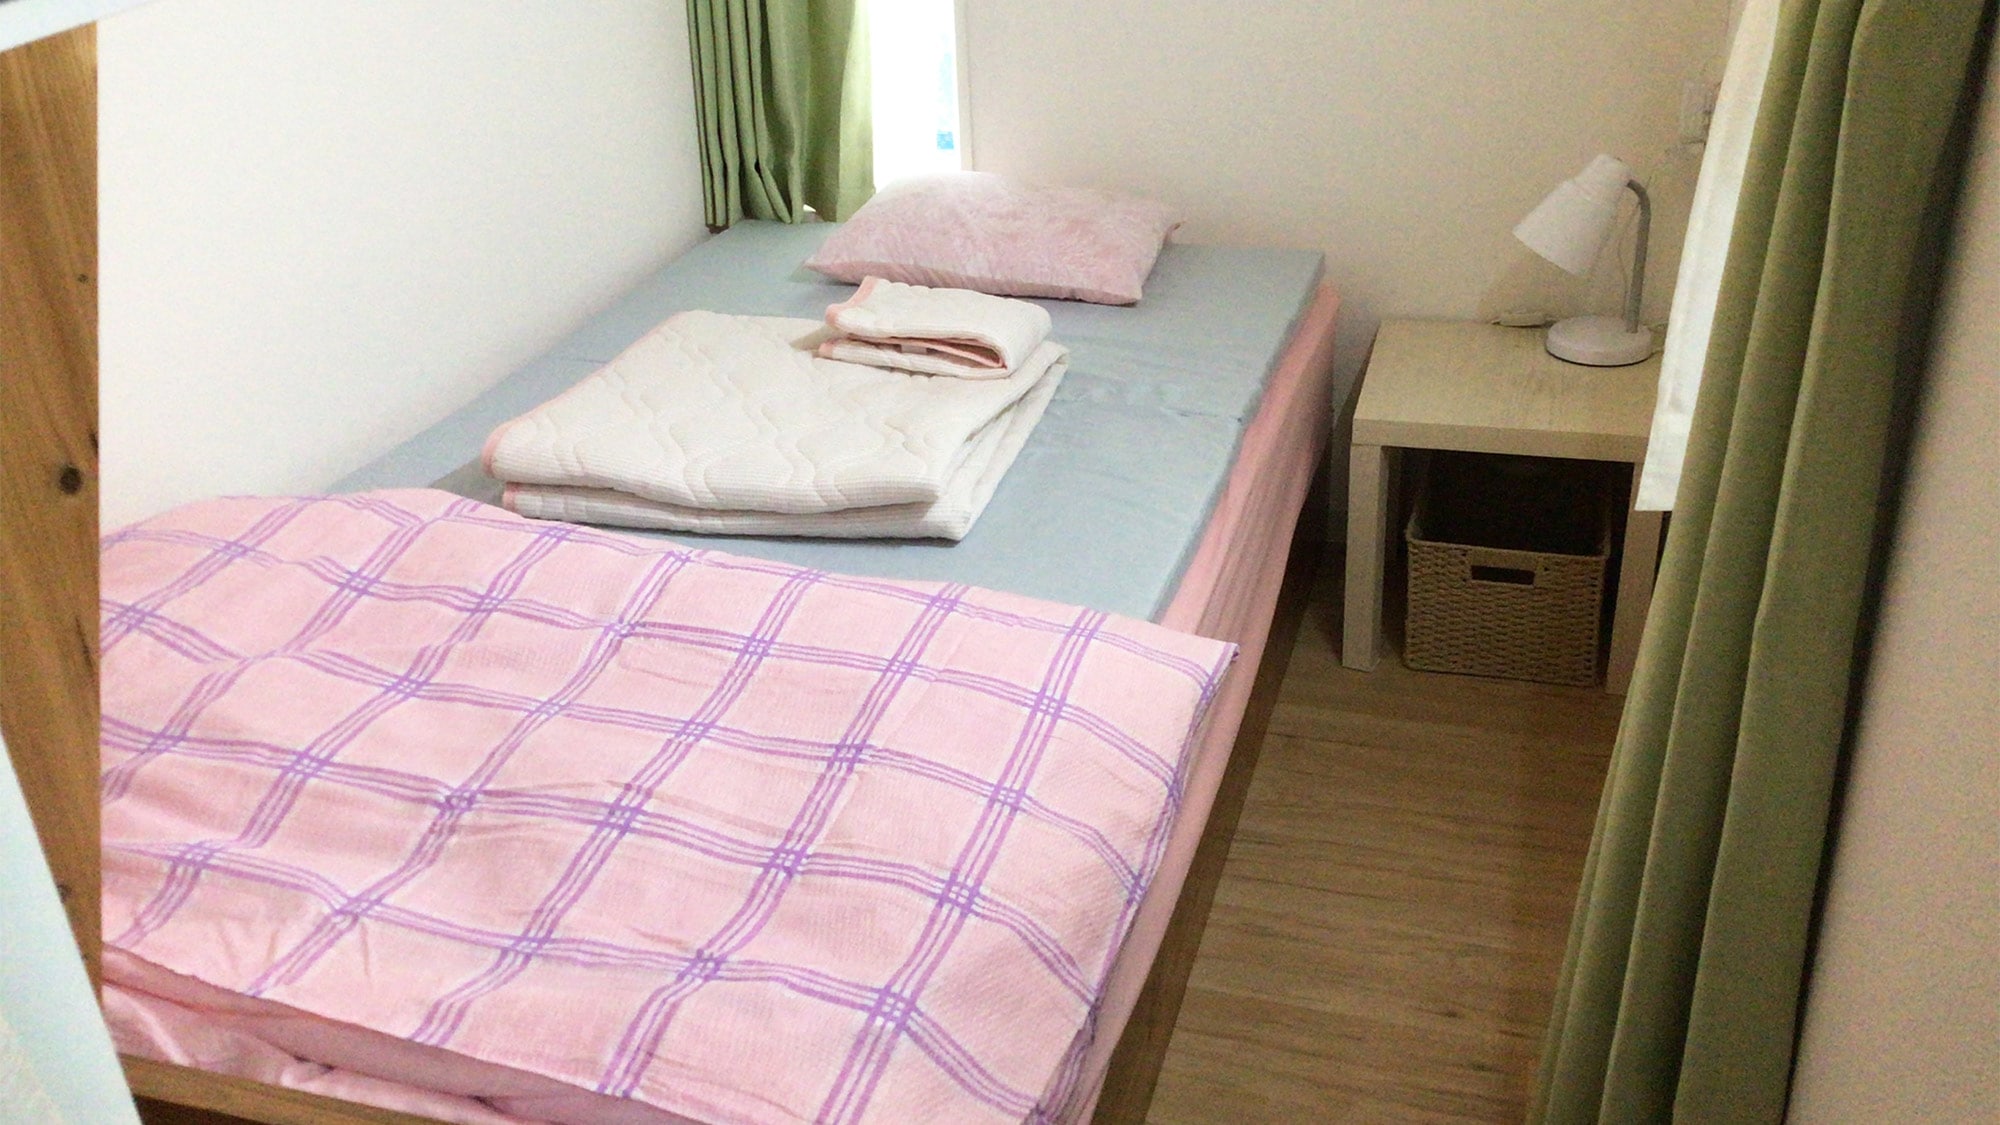 ・ Similar to the shared dormitory, this is a loft-type female-only dormitory.